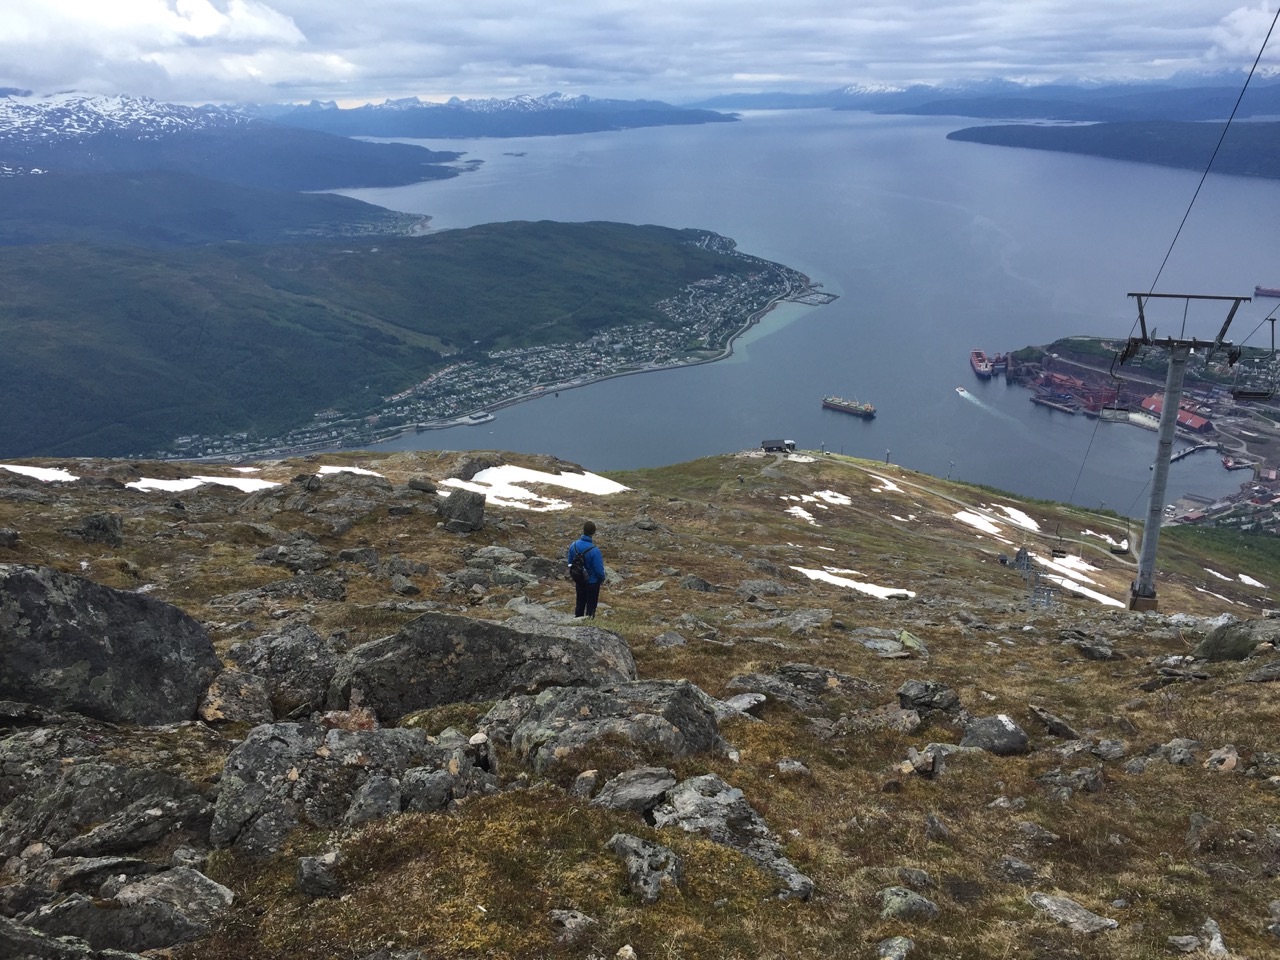 Climbing down a slope above Norwegian fjords.